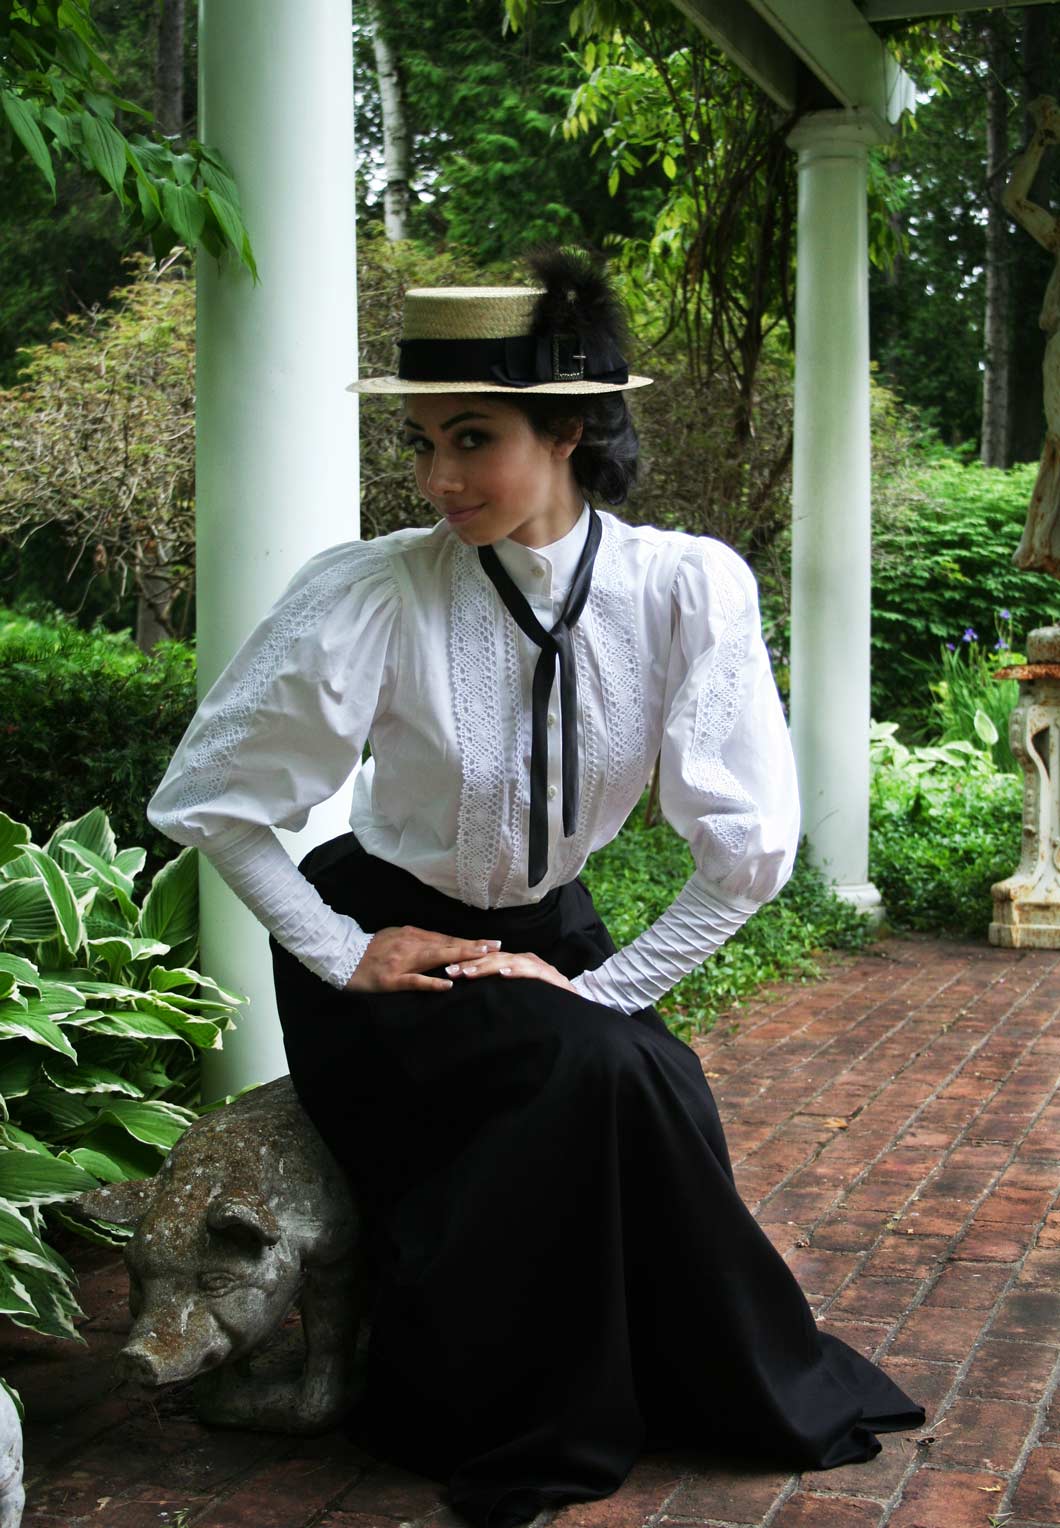 blanket bag mini Victorian Blouses as a Result of Dress Reform - Recollections Blog